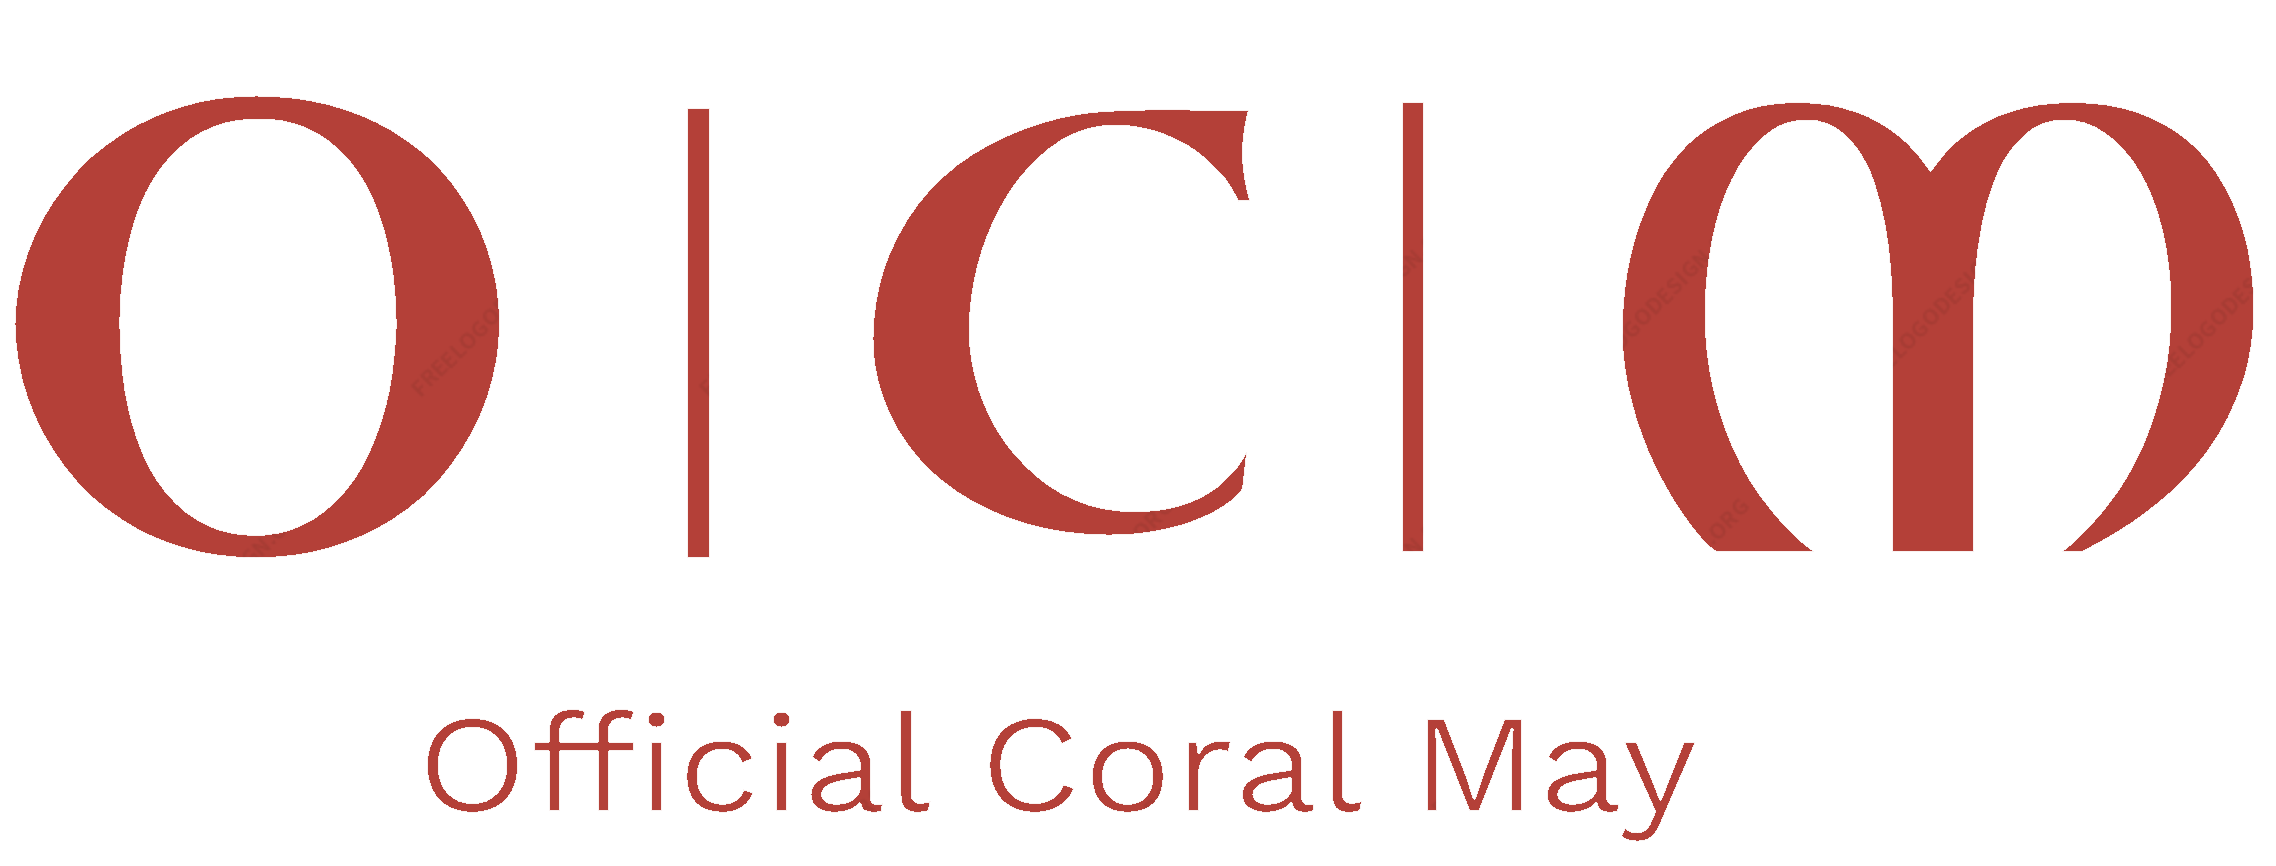 Official Coral May